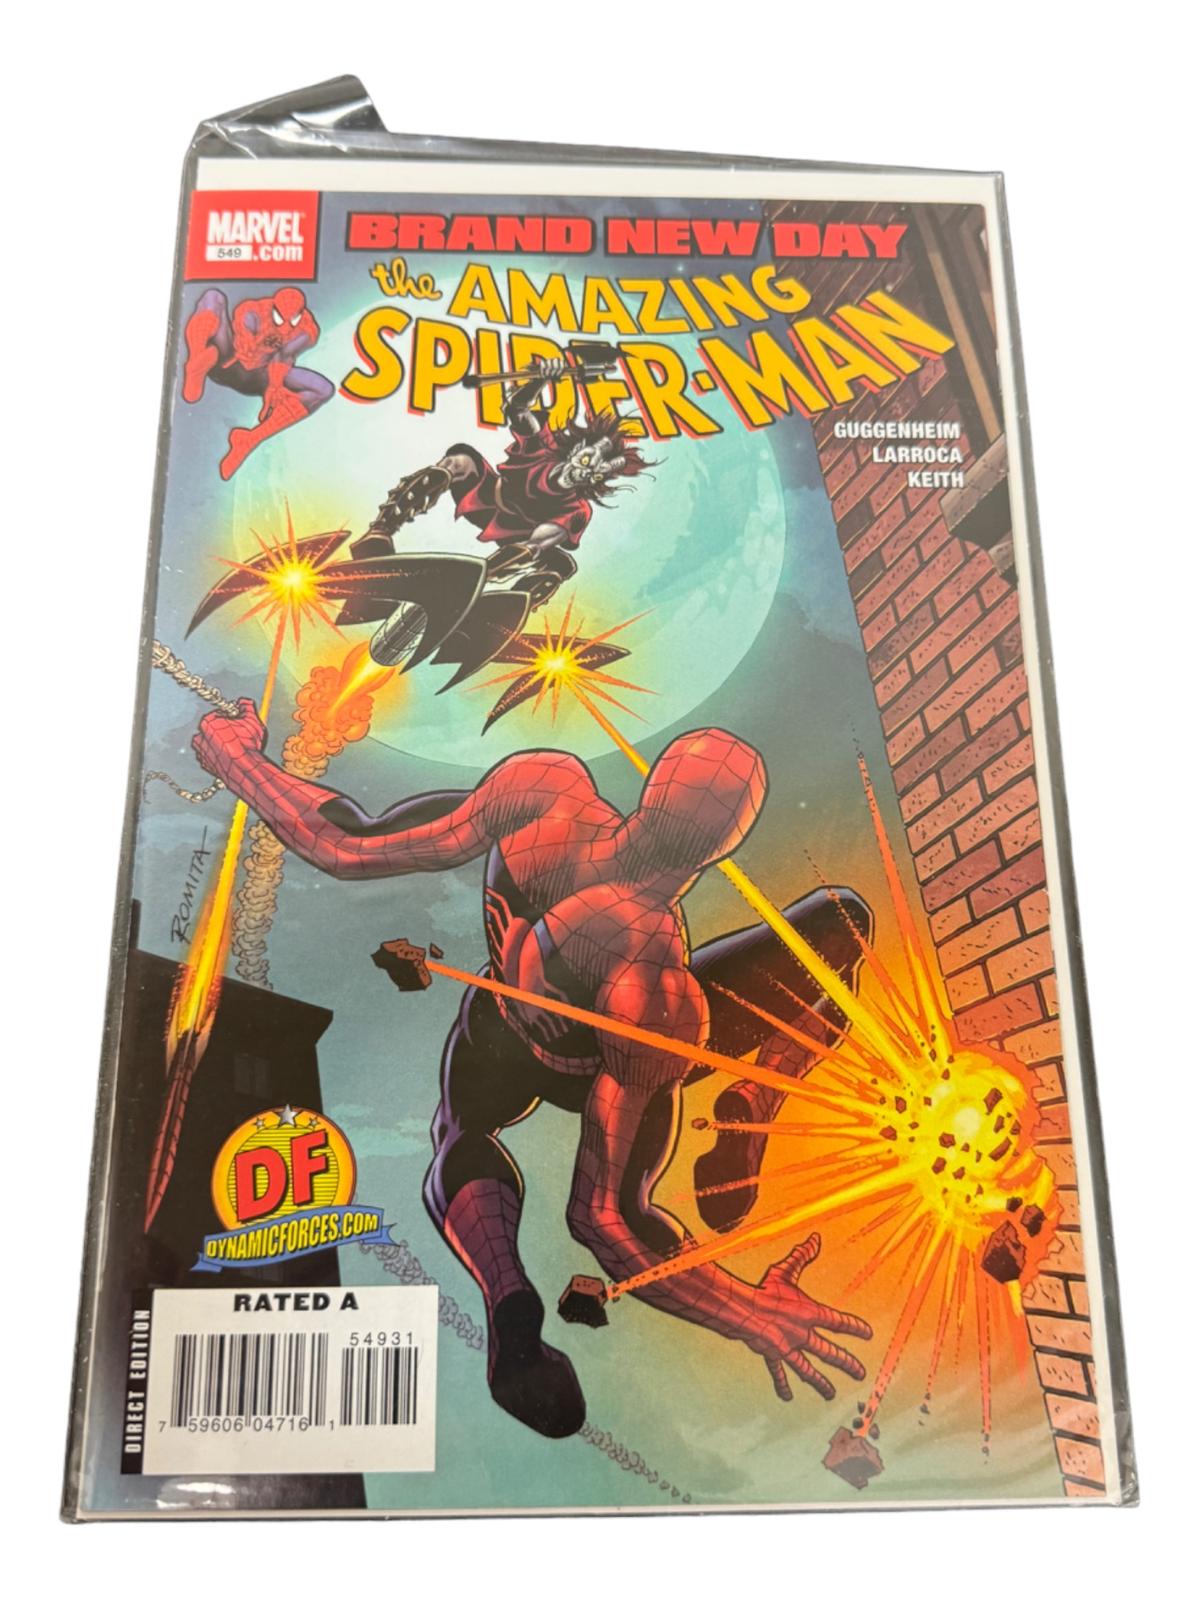 Amazing Spider-Man #549 Dynamic Force Variant with DF COA